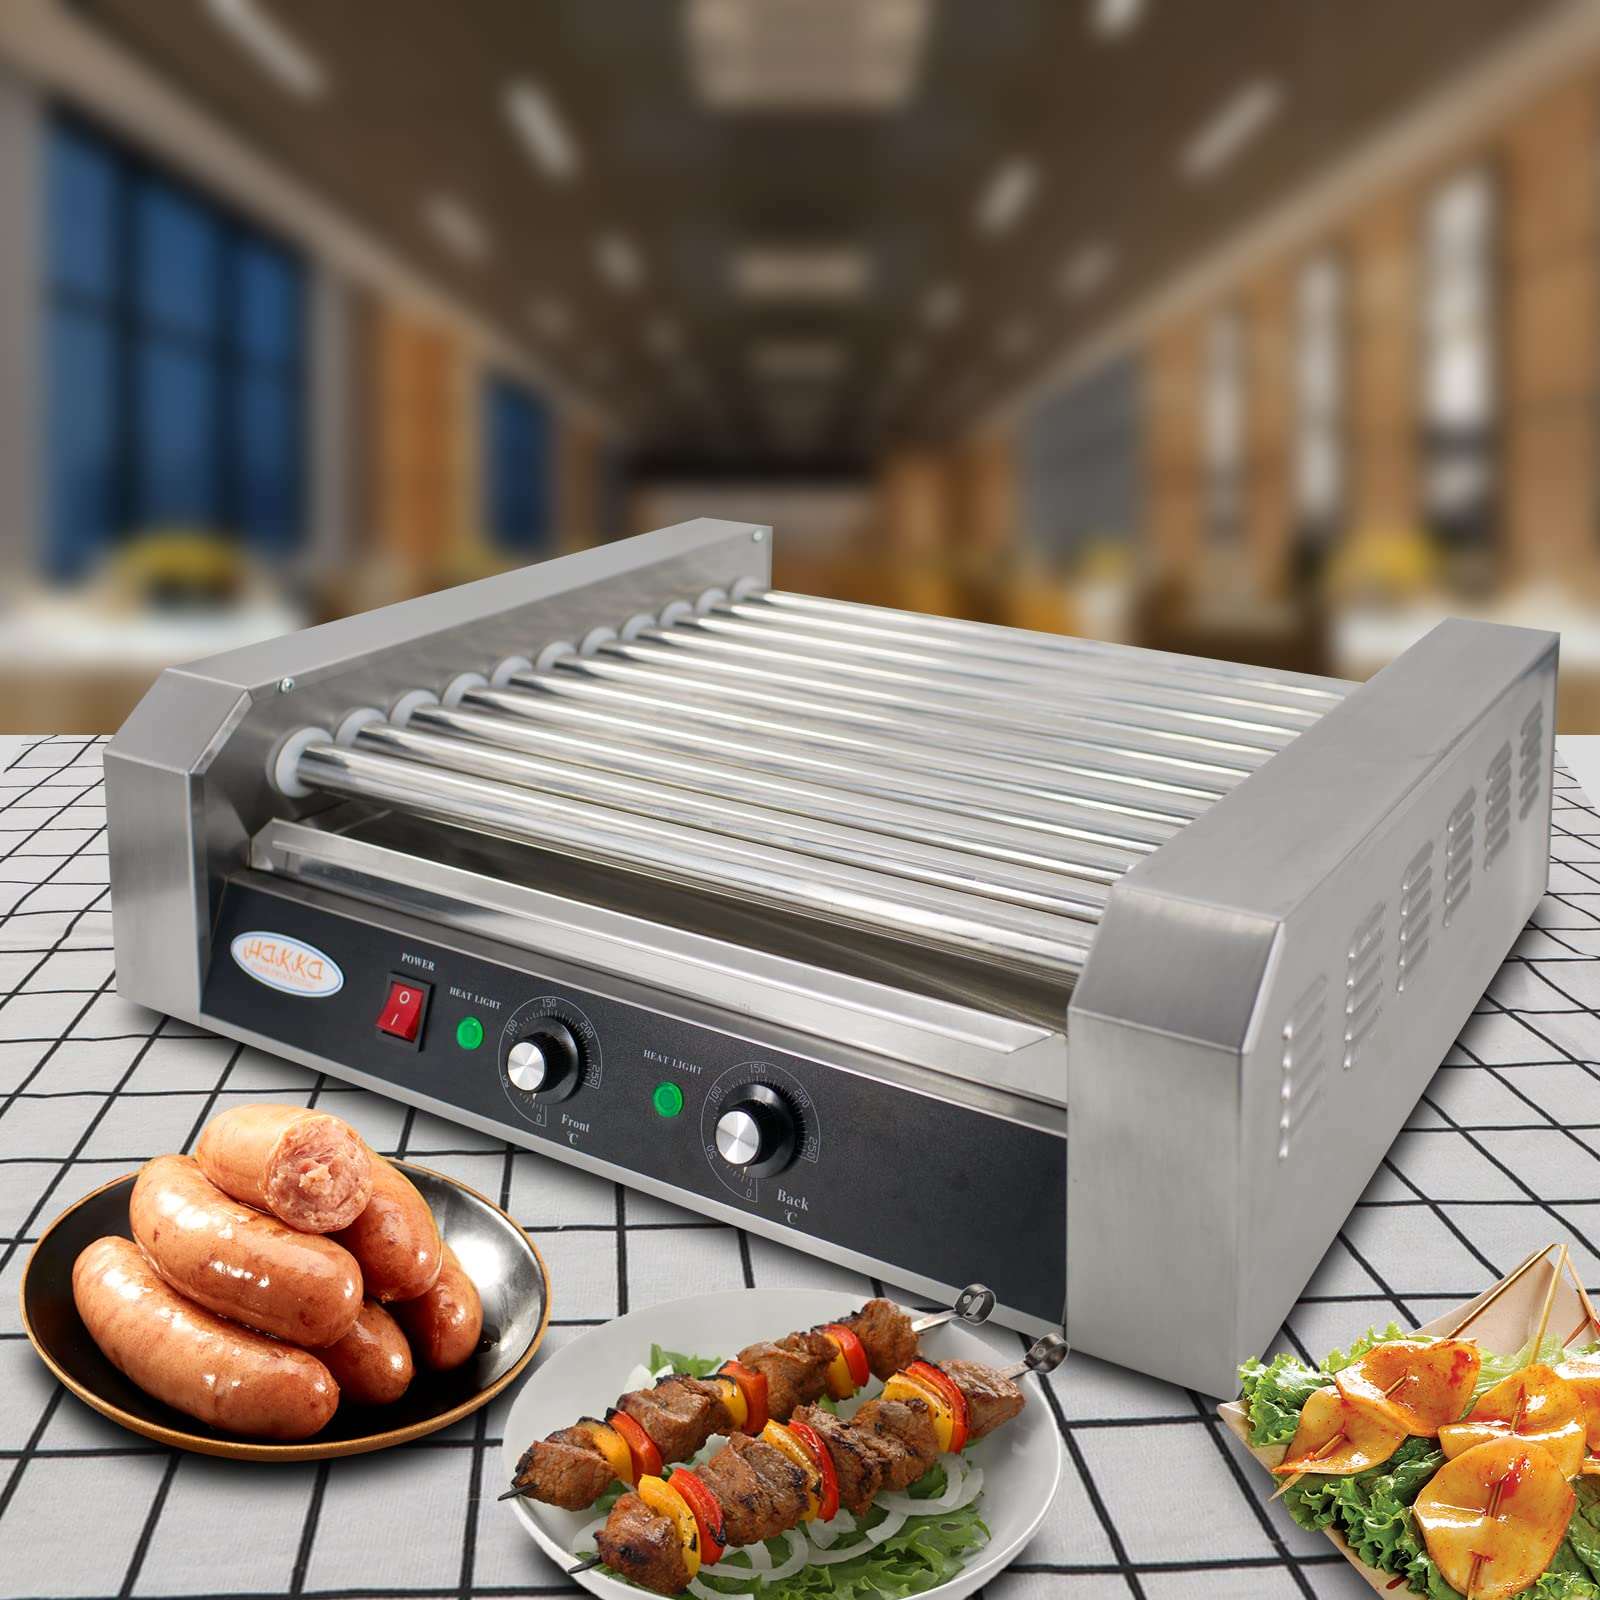 EasyRose Commercial Hot Dog Roller Grill with 5 Rollers